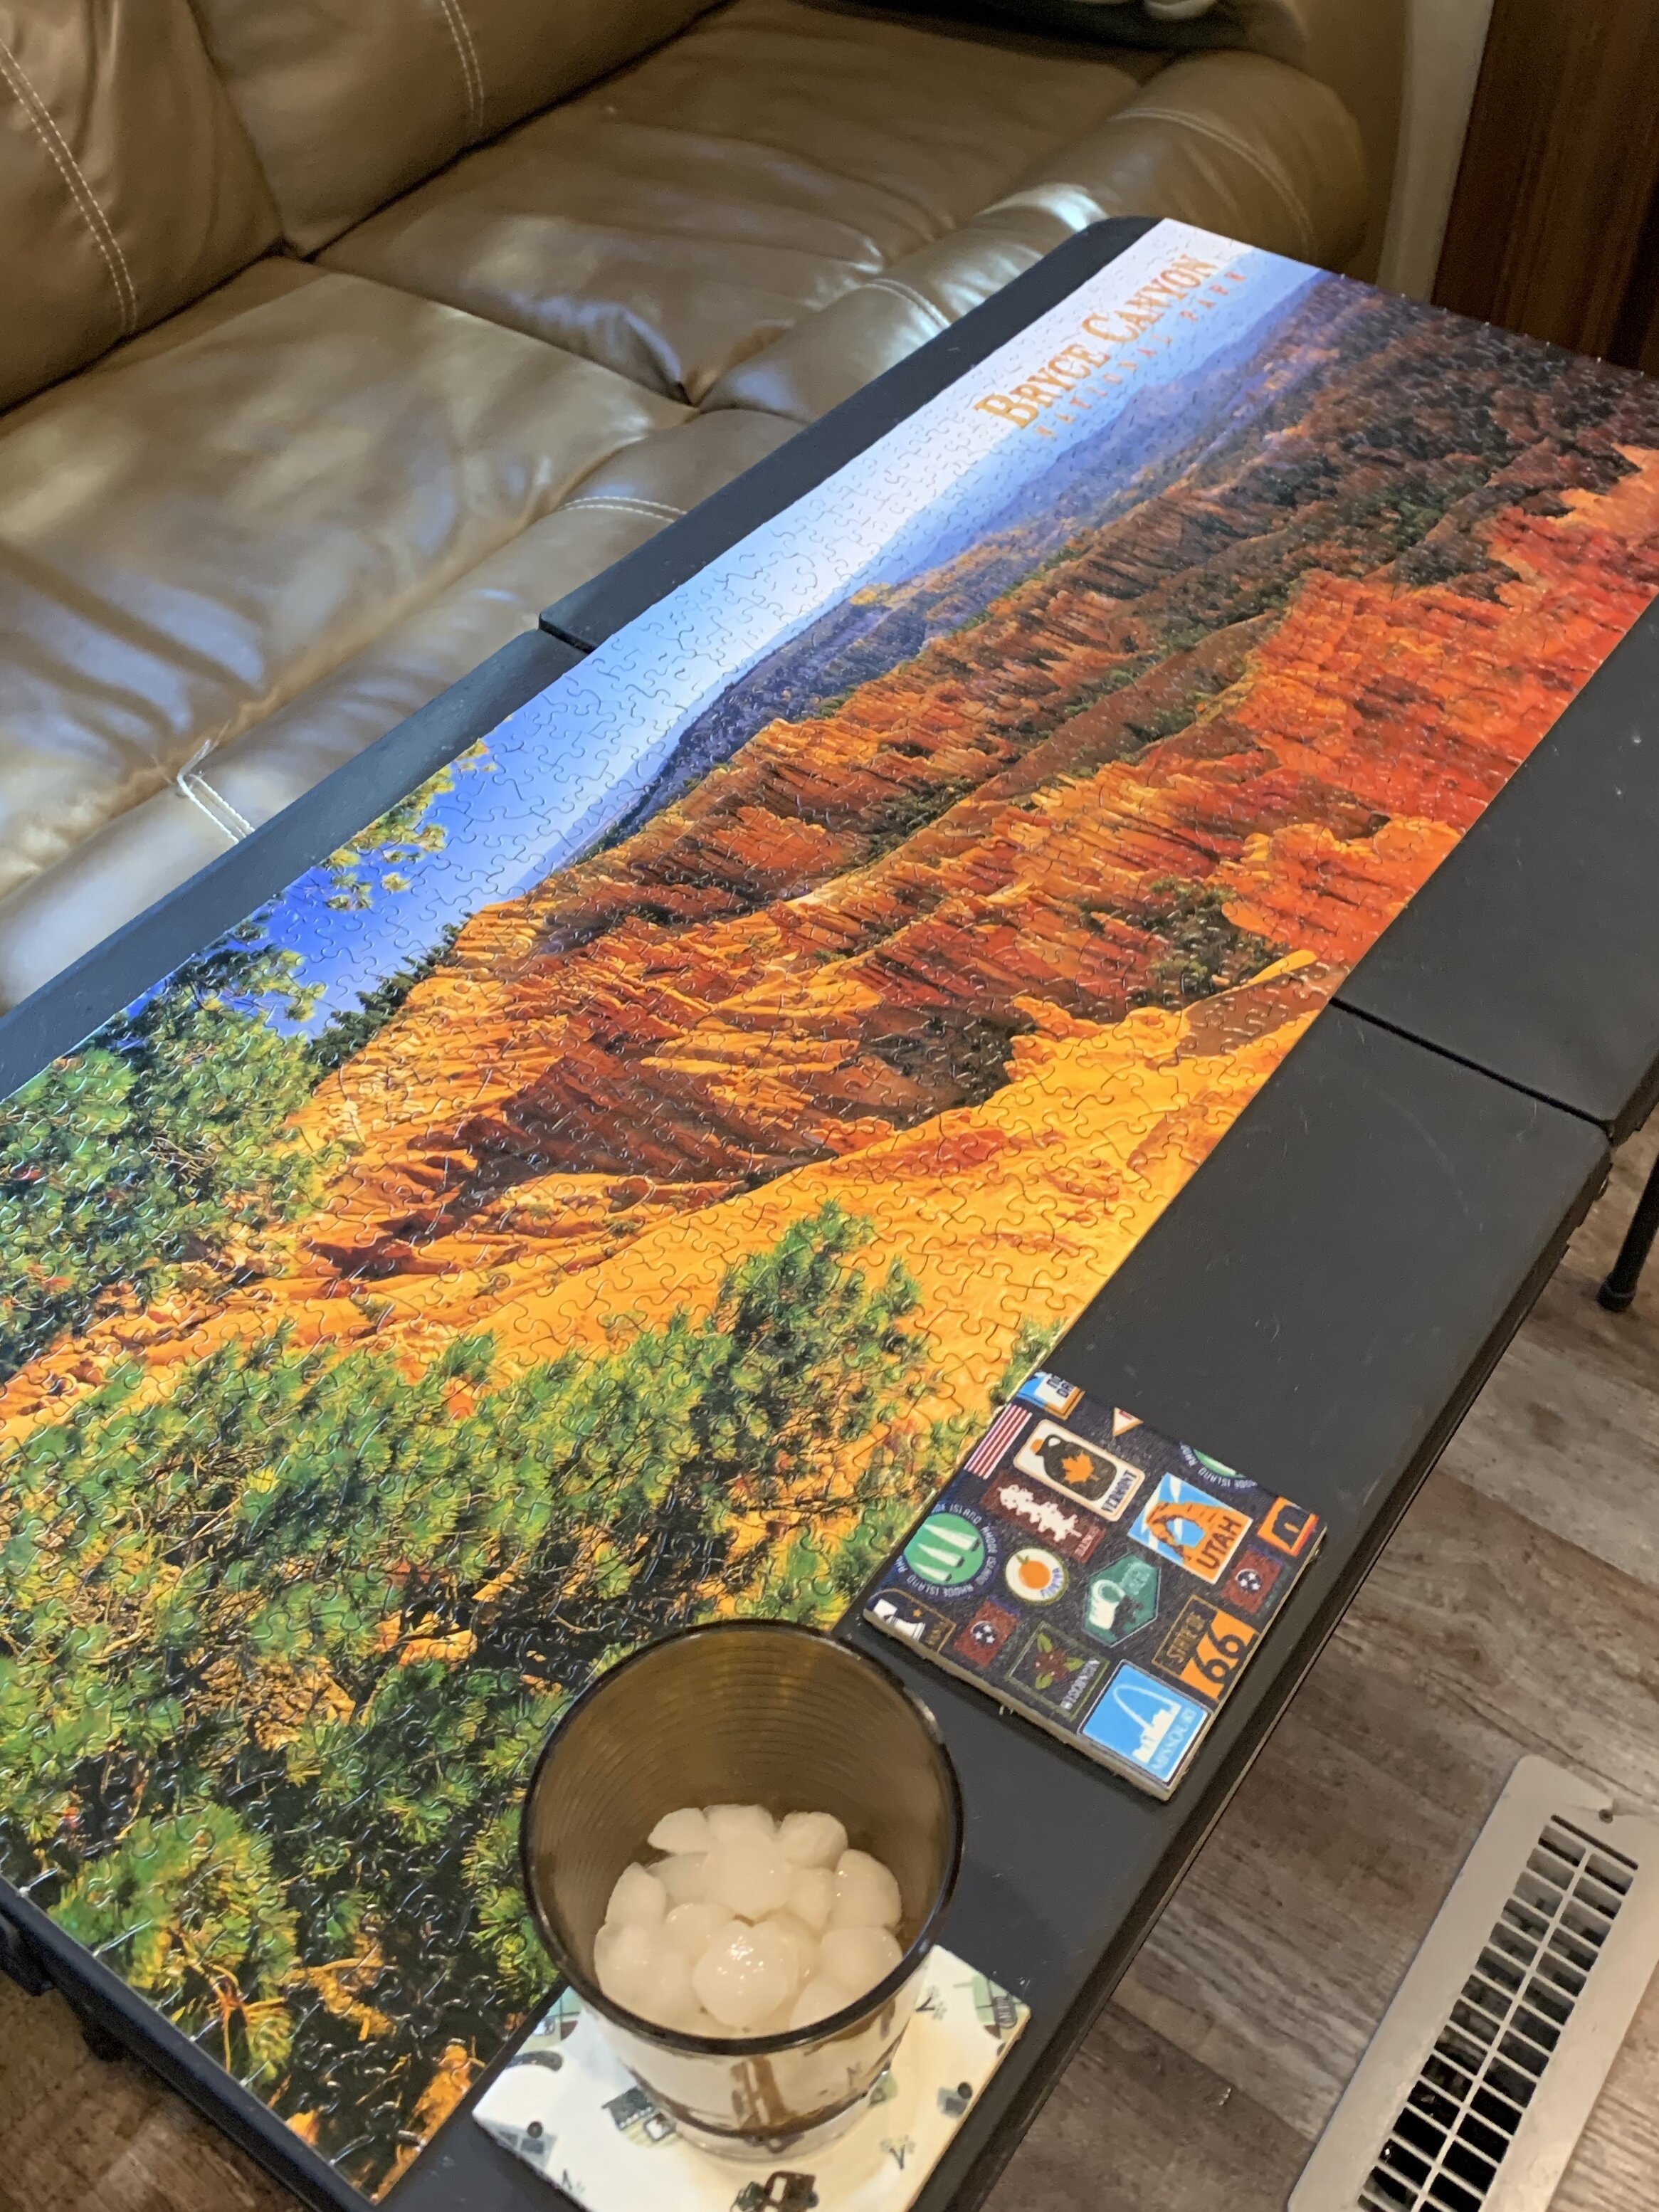  After falling in love with Bryce Canyon in Utah, we purchased this puzzle. 1000 pieces. Our first puzzle ever. It was so hard. We thought we may give up. We carried this project through four states and almost 1500 miles before it’s glorious completi